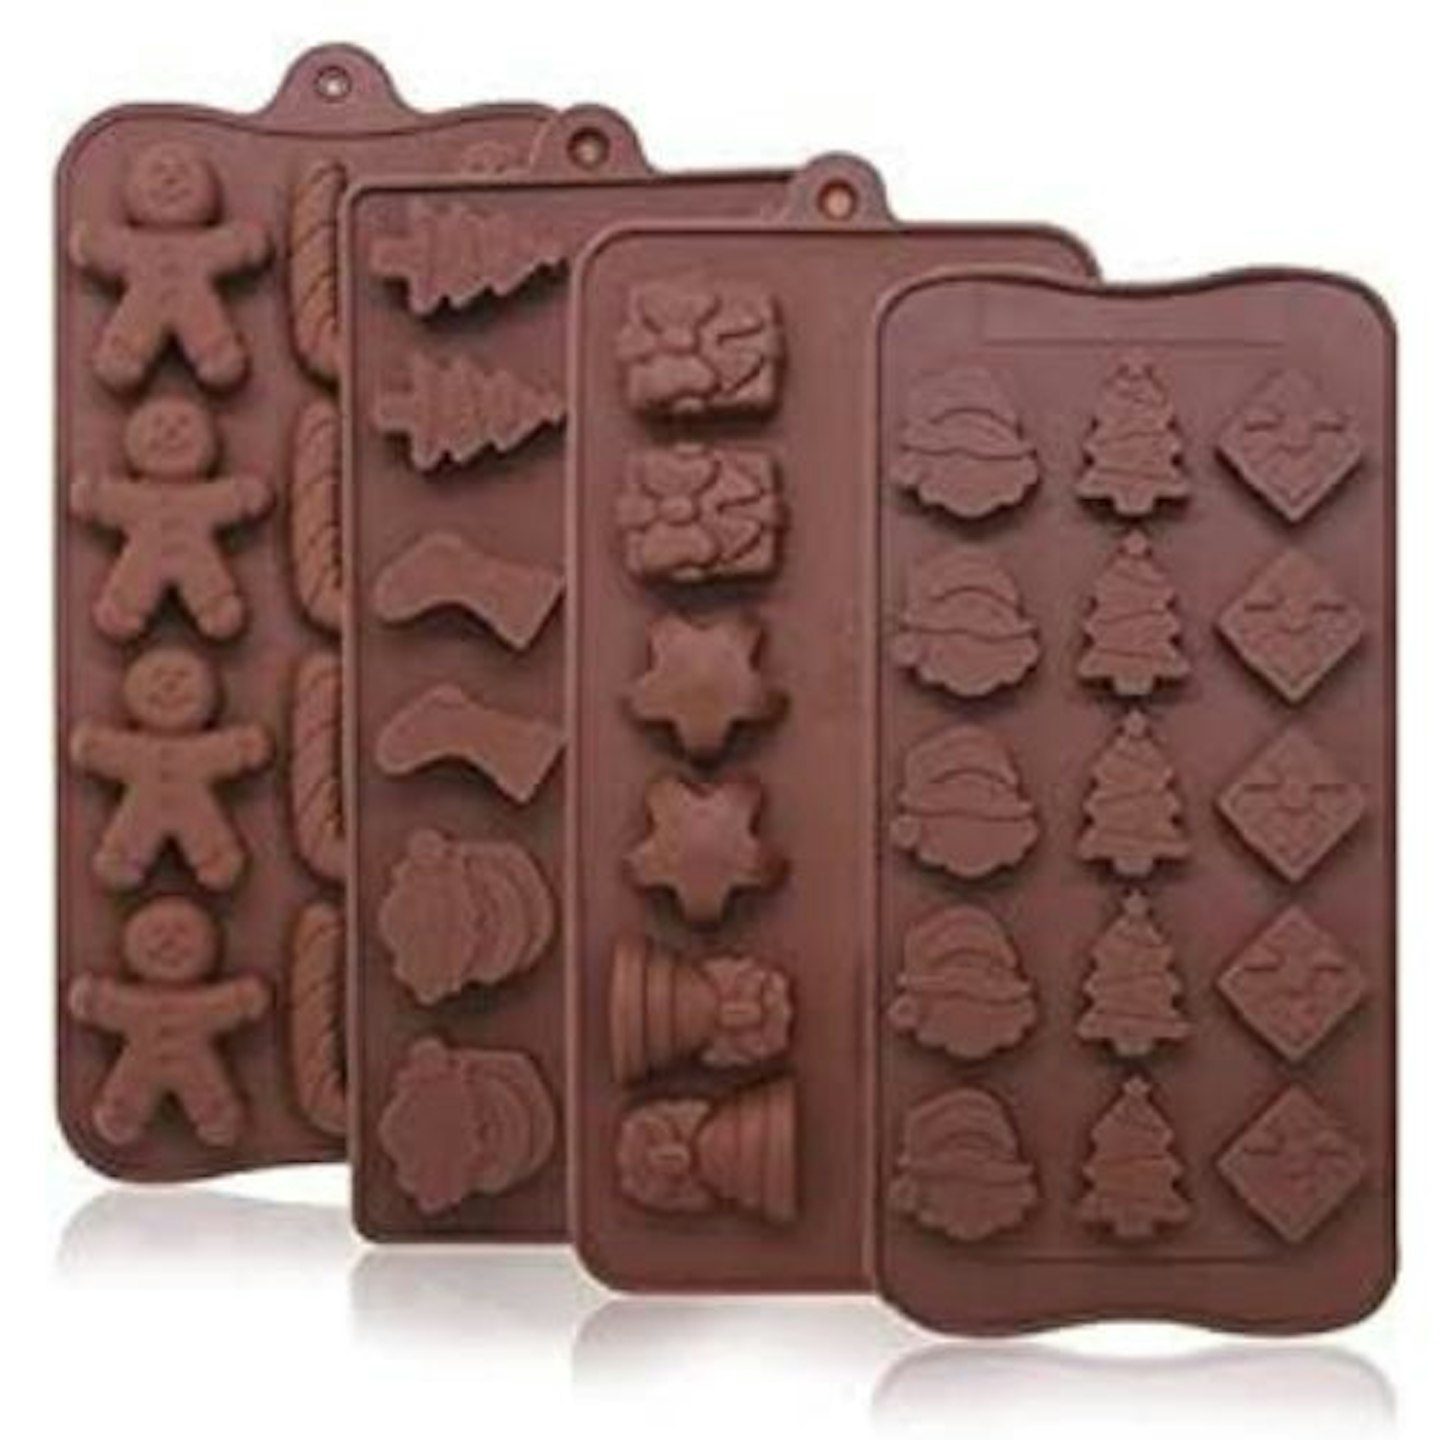 Christmas Silicone Chocolate Moulds